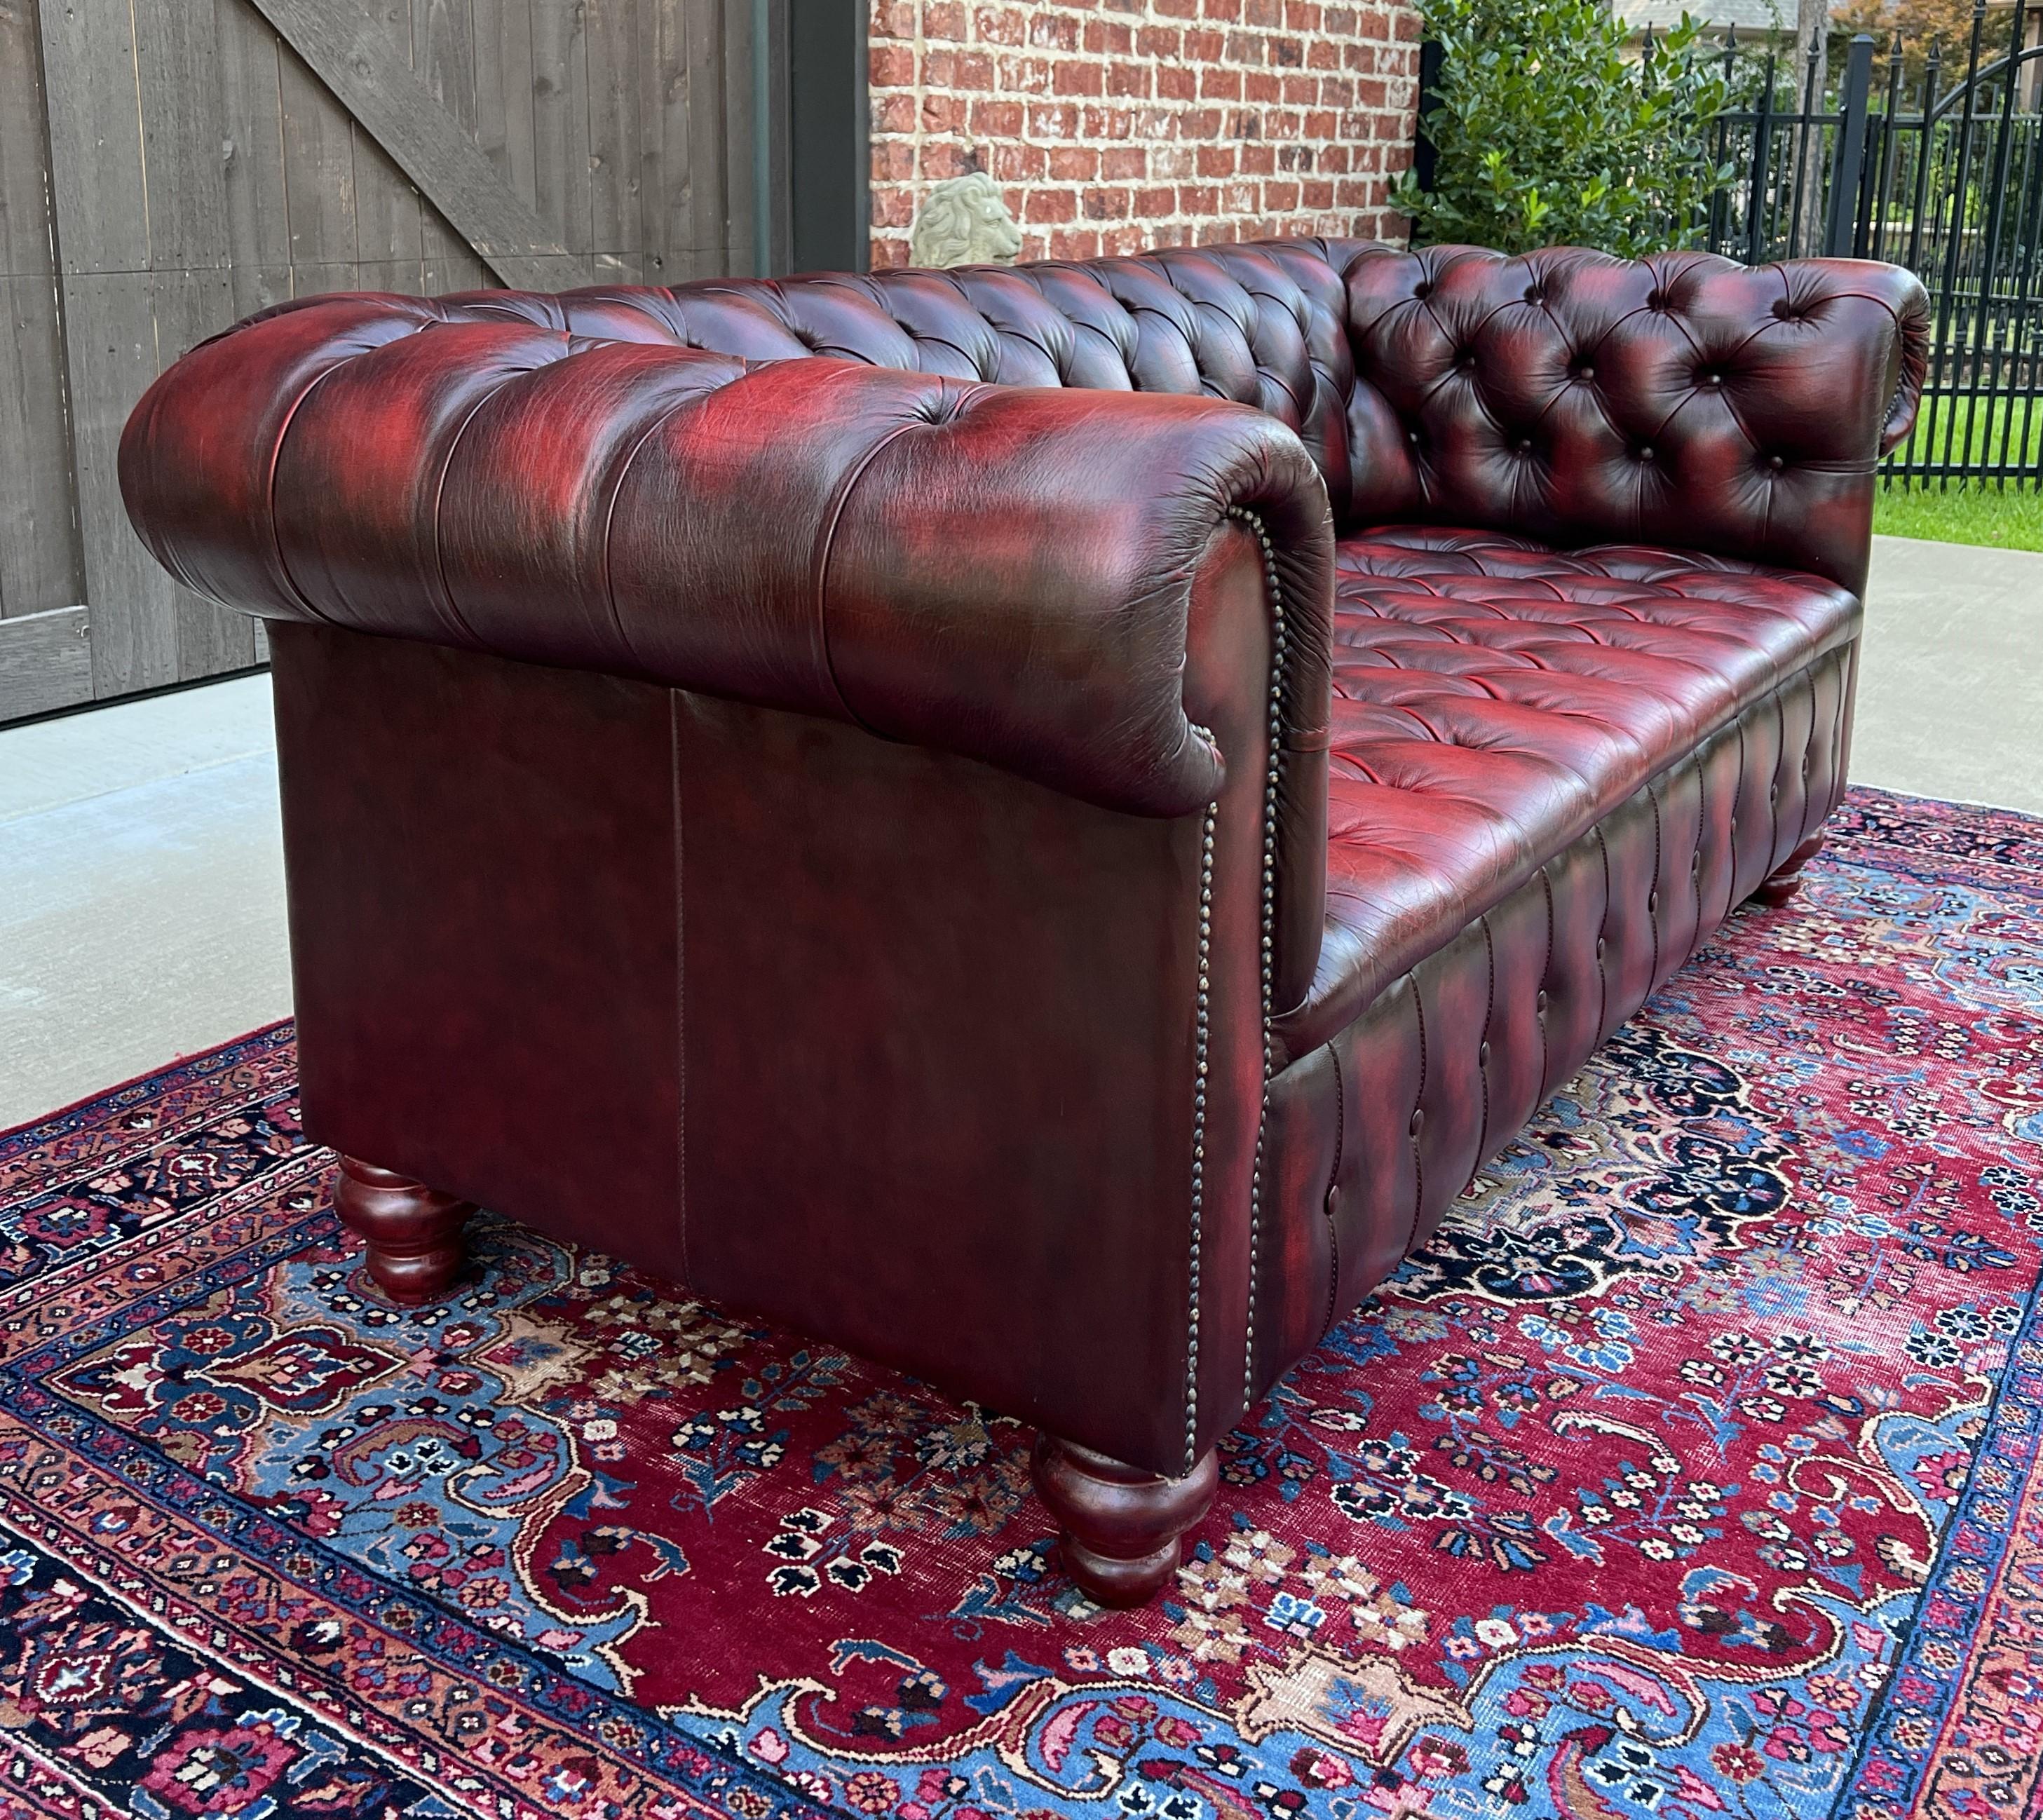 Vintage English Chesterfield Sofa Leather Tufted Seat Oxblood Red Mid-Century #1 7